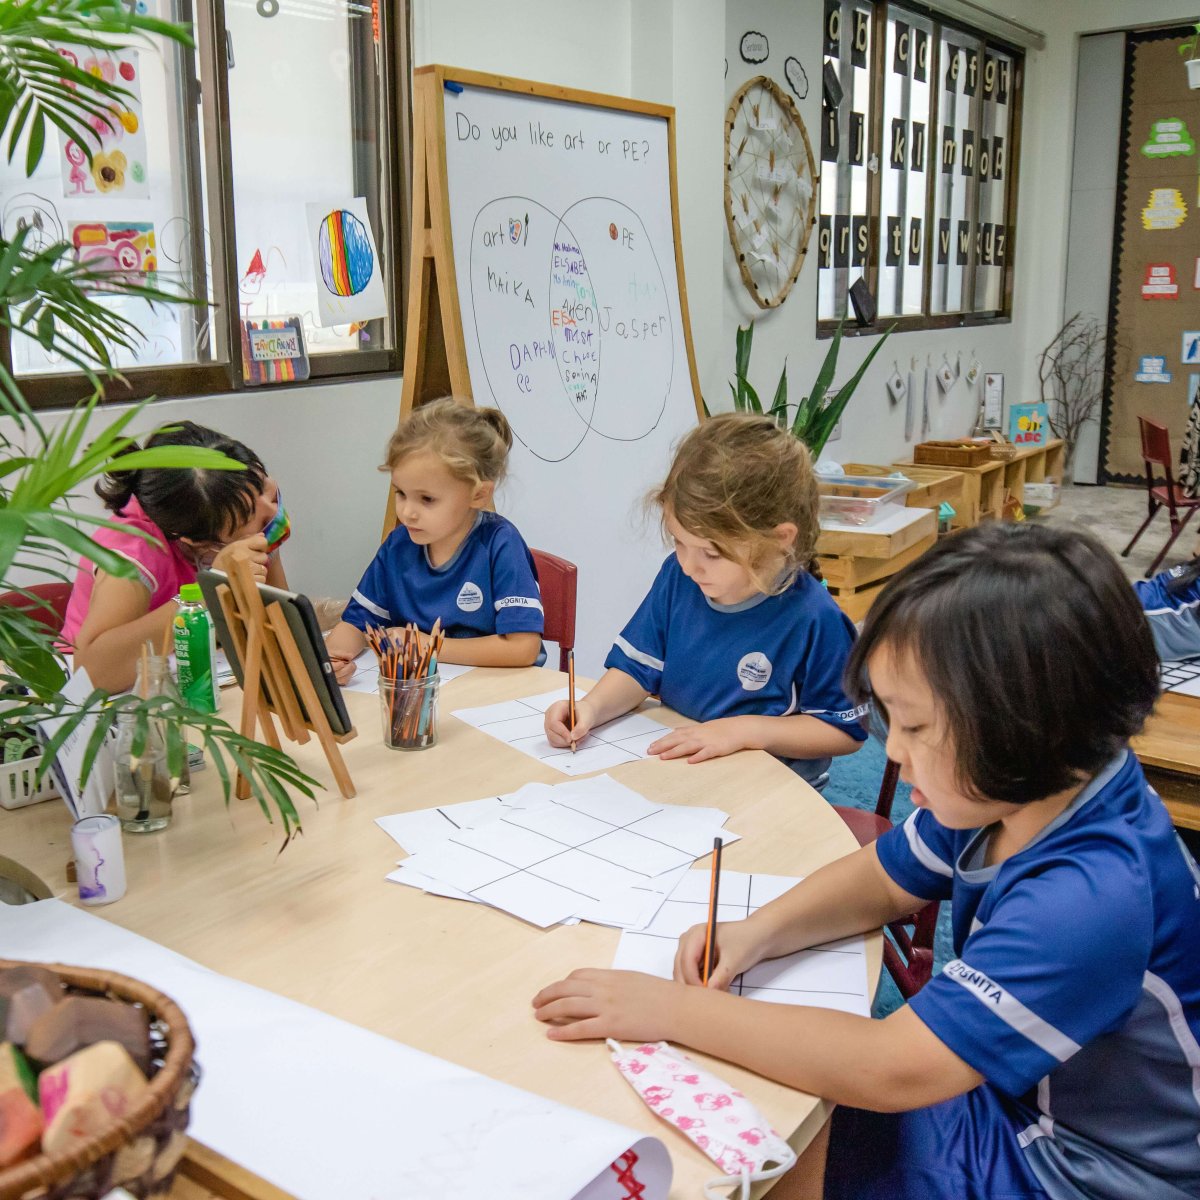 Early Explorer students in a classroom setting